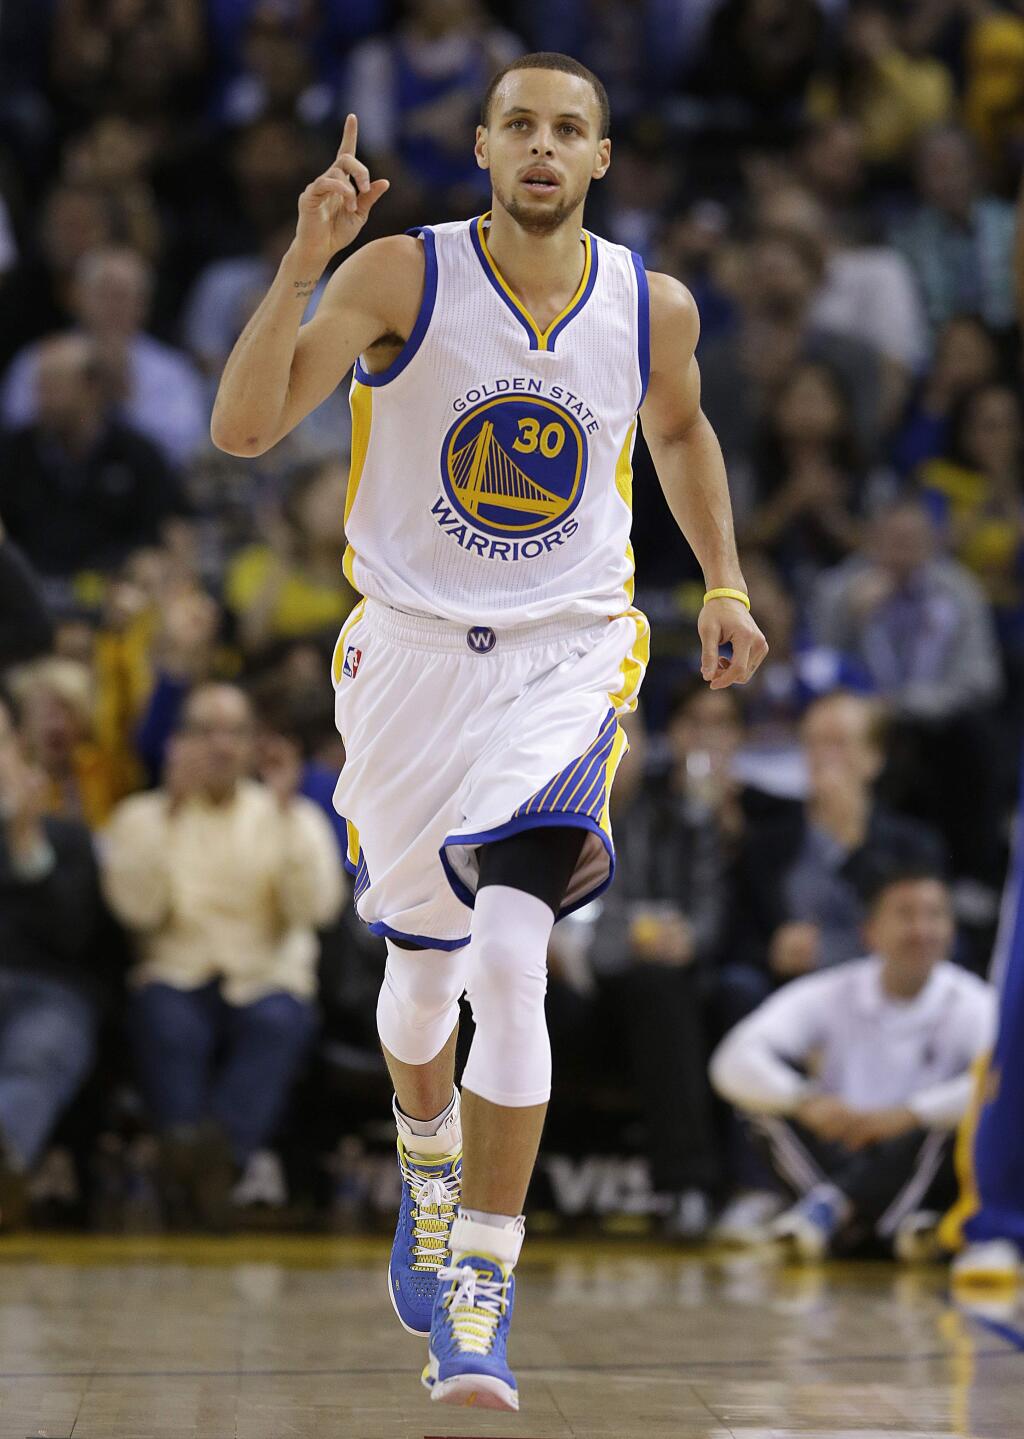 Golden State Warriors guard Stephen Curry celebrates after making a 3-point basket against the Miami Heat during the first half of an NBA basketball game in Oakland, Calif., Wednesday, Jan. 14, 2015. (AP Photo/Jeff Chiu)